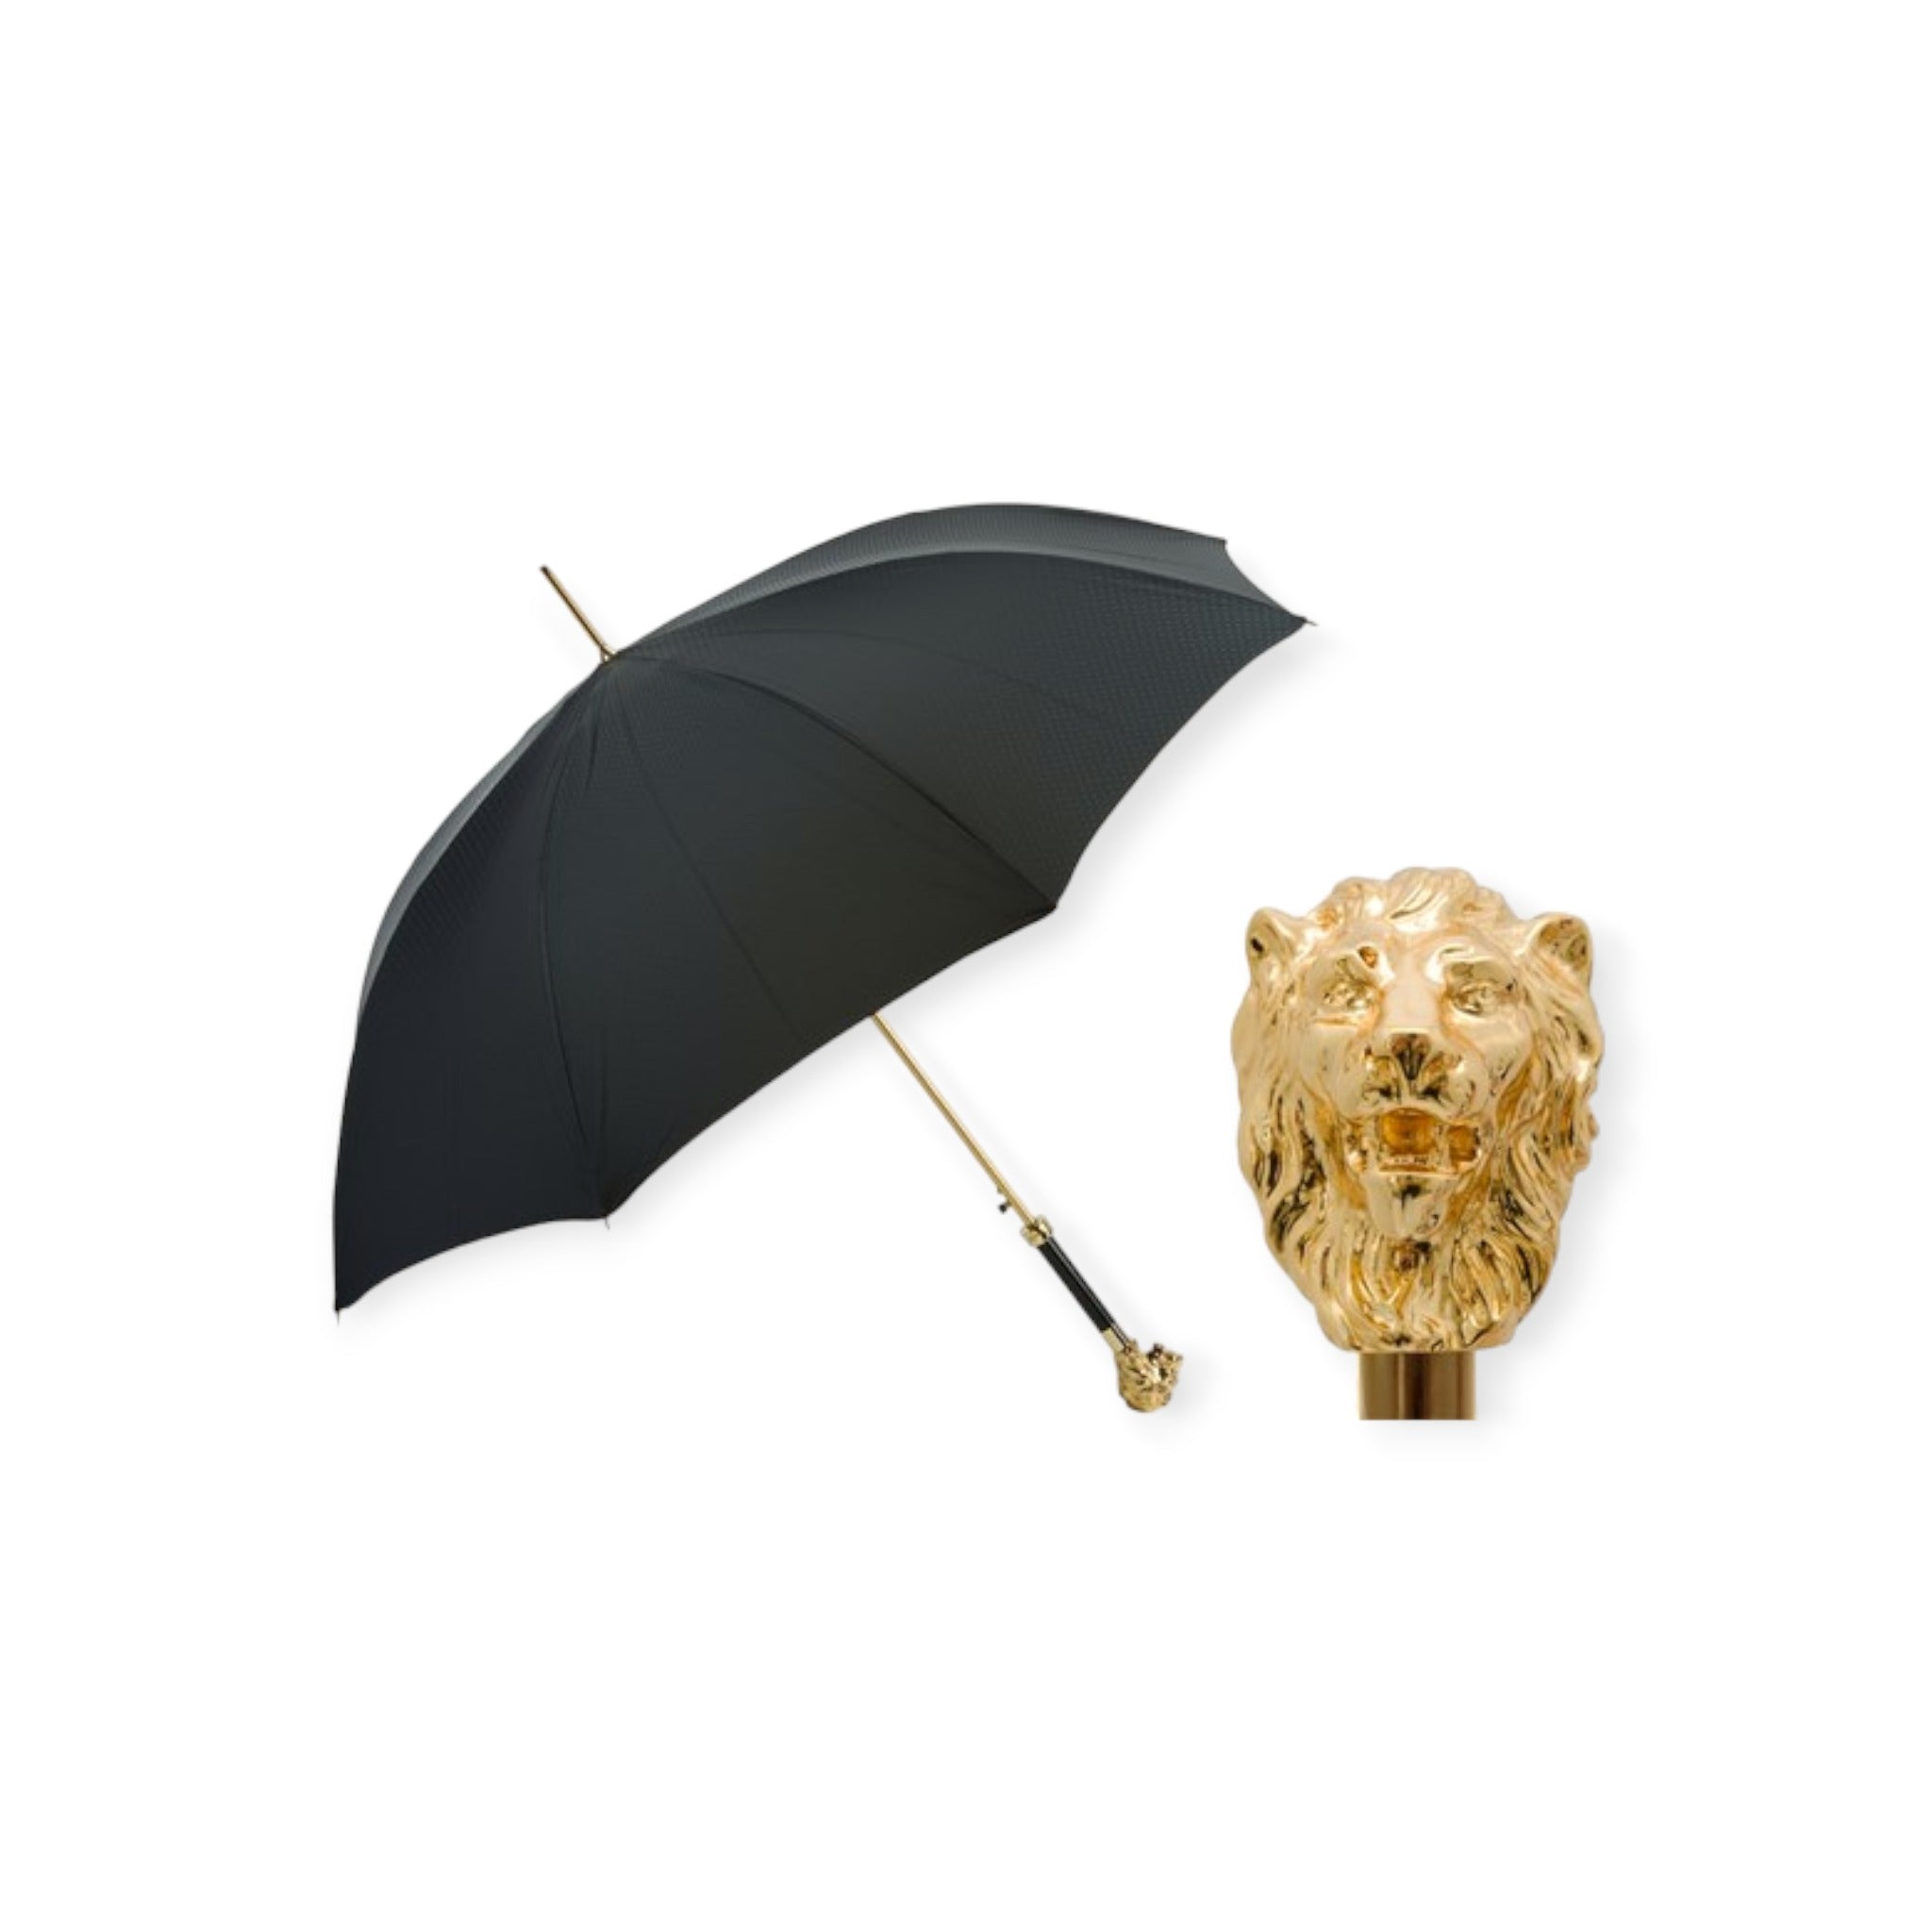 Opened Pasotti Lion umbrella on an angle with close up of lion handle